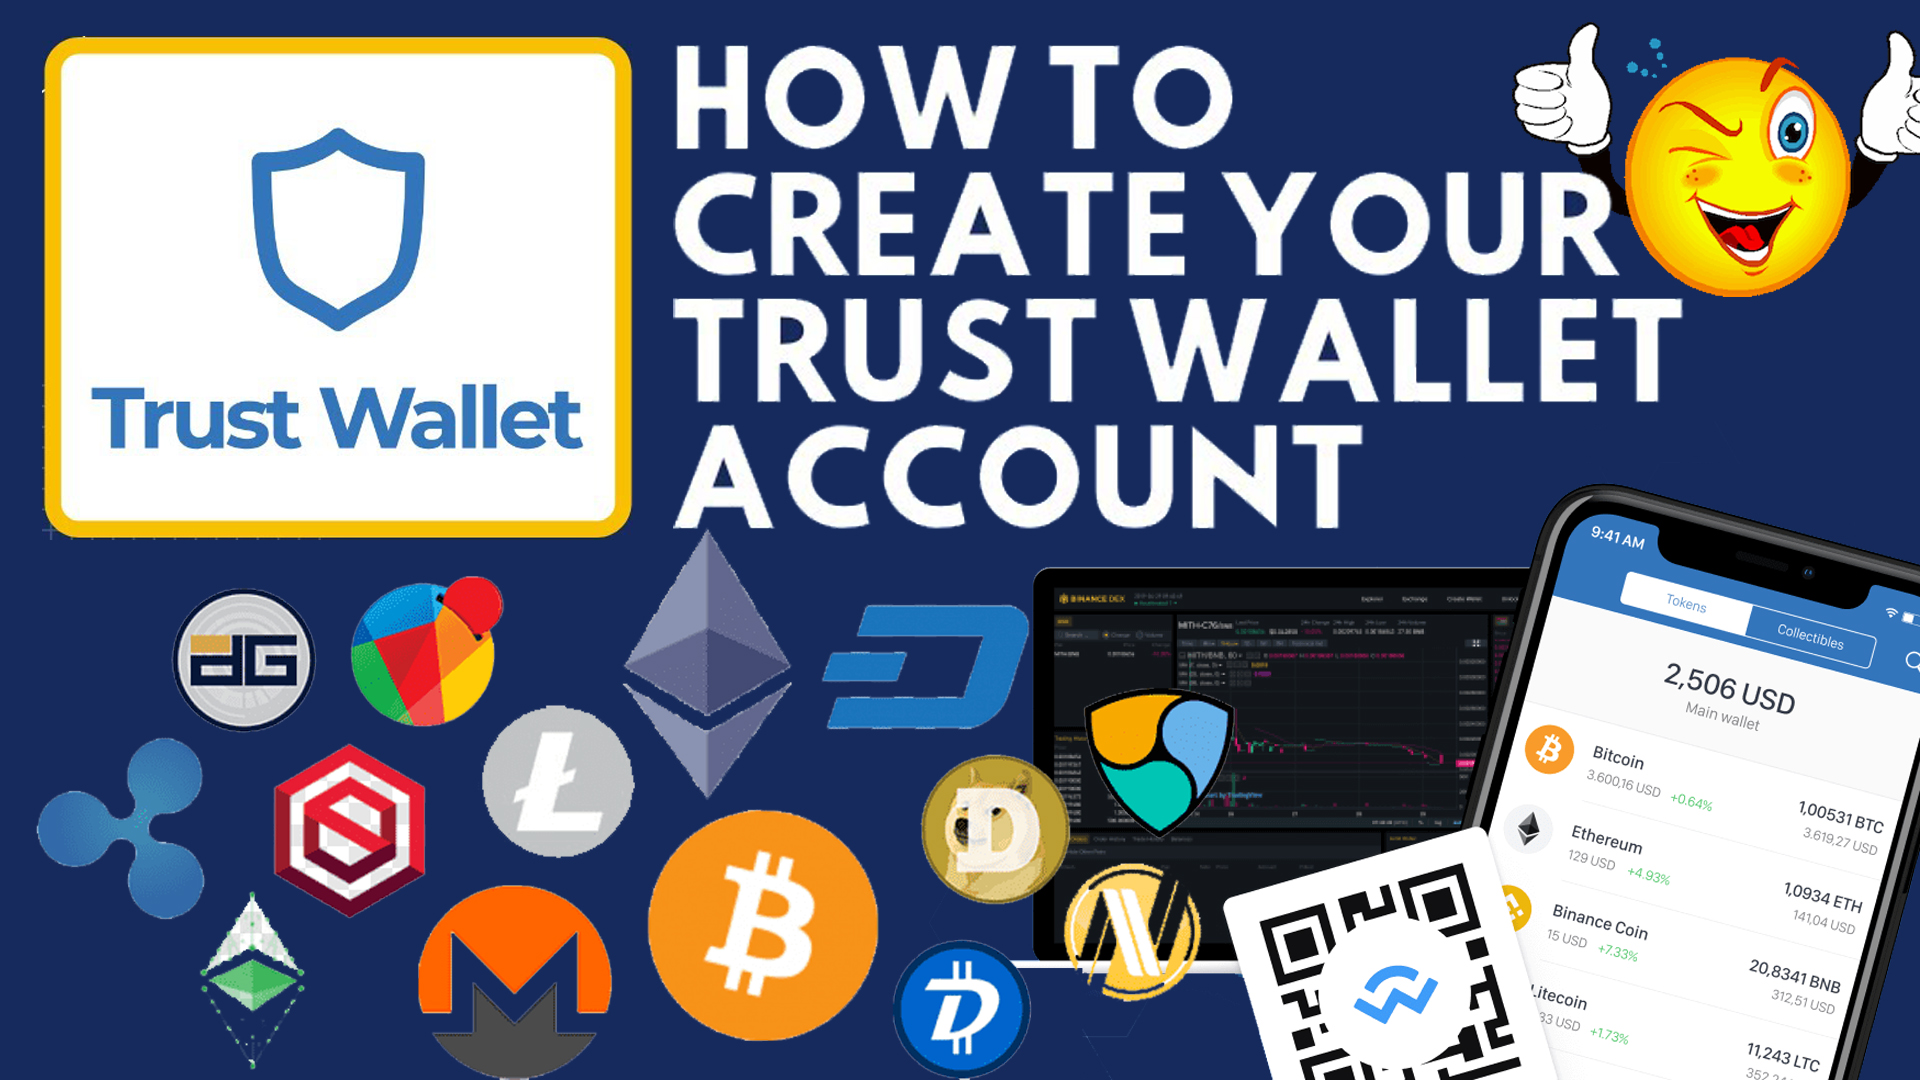 How To Create Account Of Trust Wallet By Crypto Wallets Info.jpg